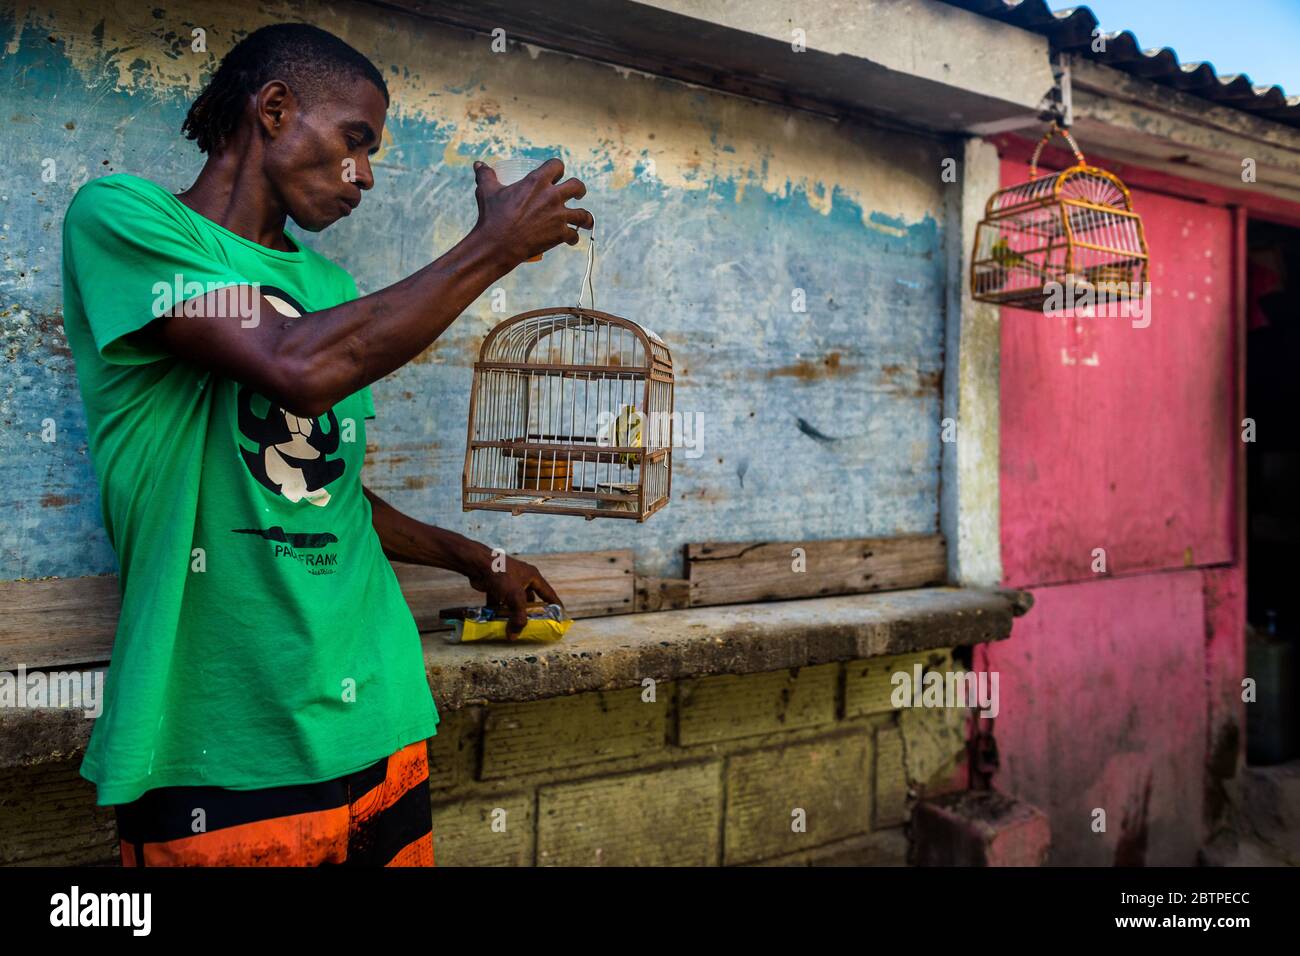 A Colombian bird vendor holds a birdcage, with a canary inside, in the bird market in Cartagena, Colombia. Stock Photo